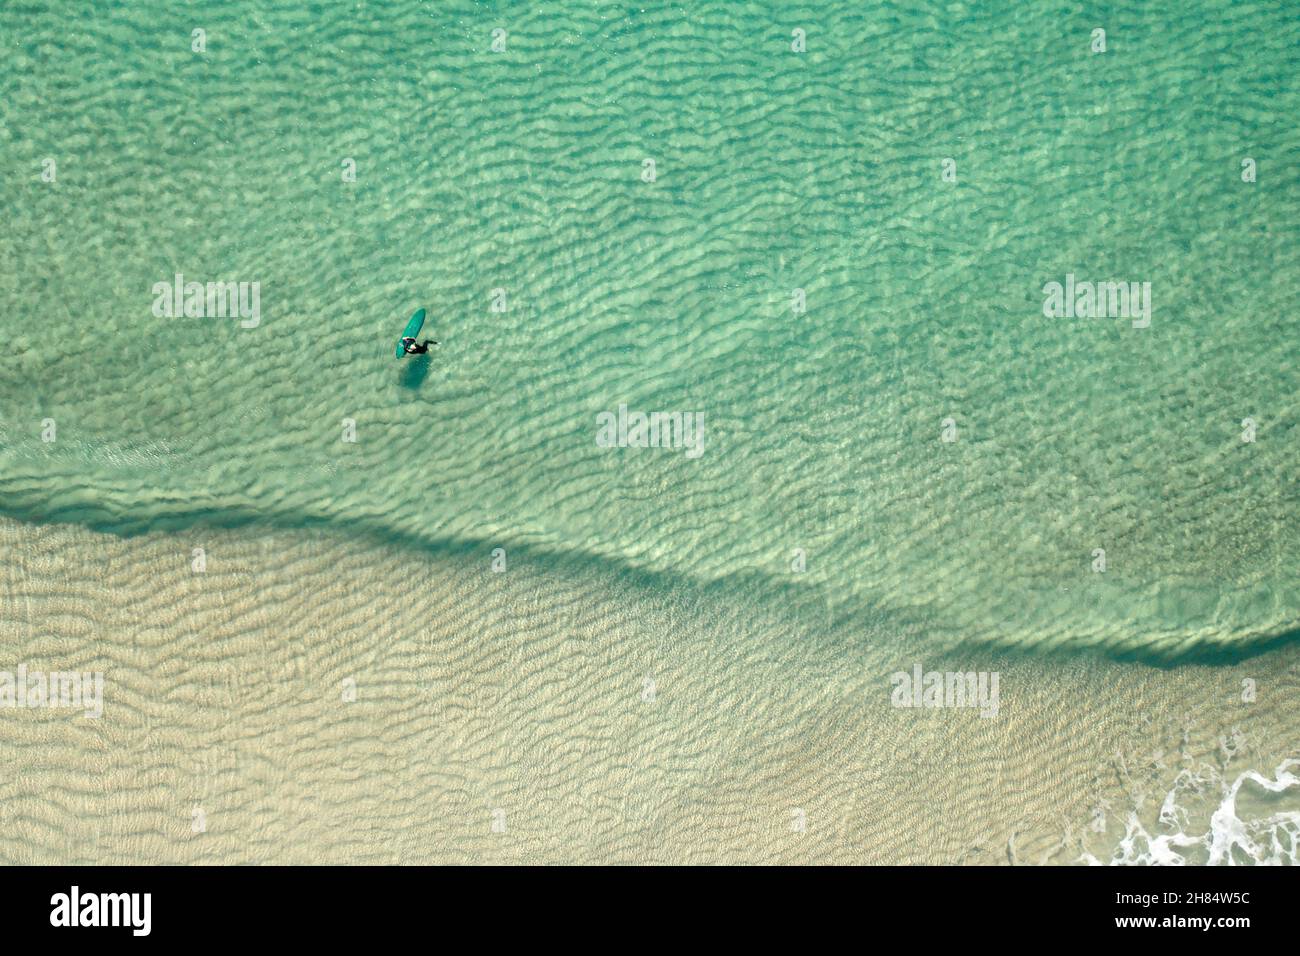 Aerial view of a surfer in the clear waters of tropical looking Pedn Vounder beach, west Cornwall at low tide in winter. Stock Photo